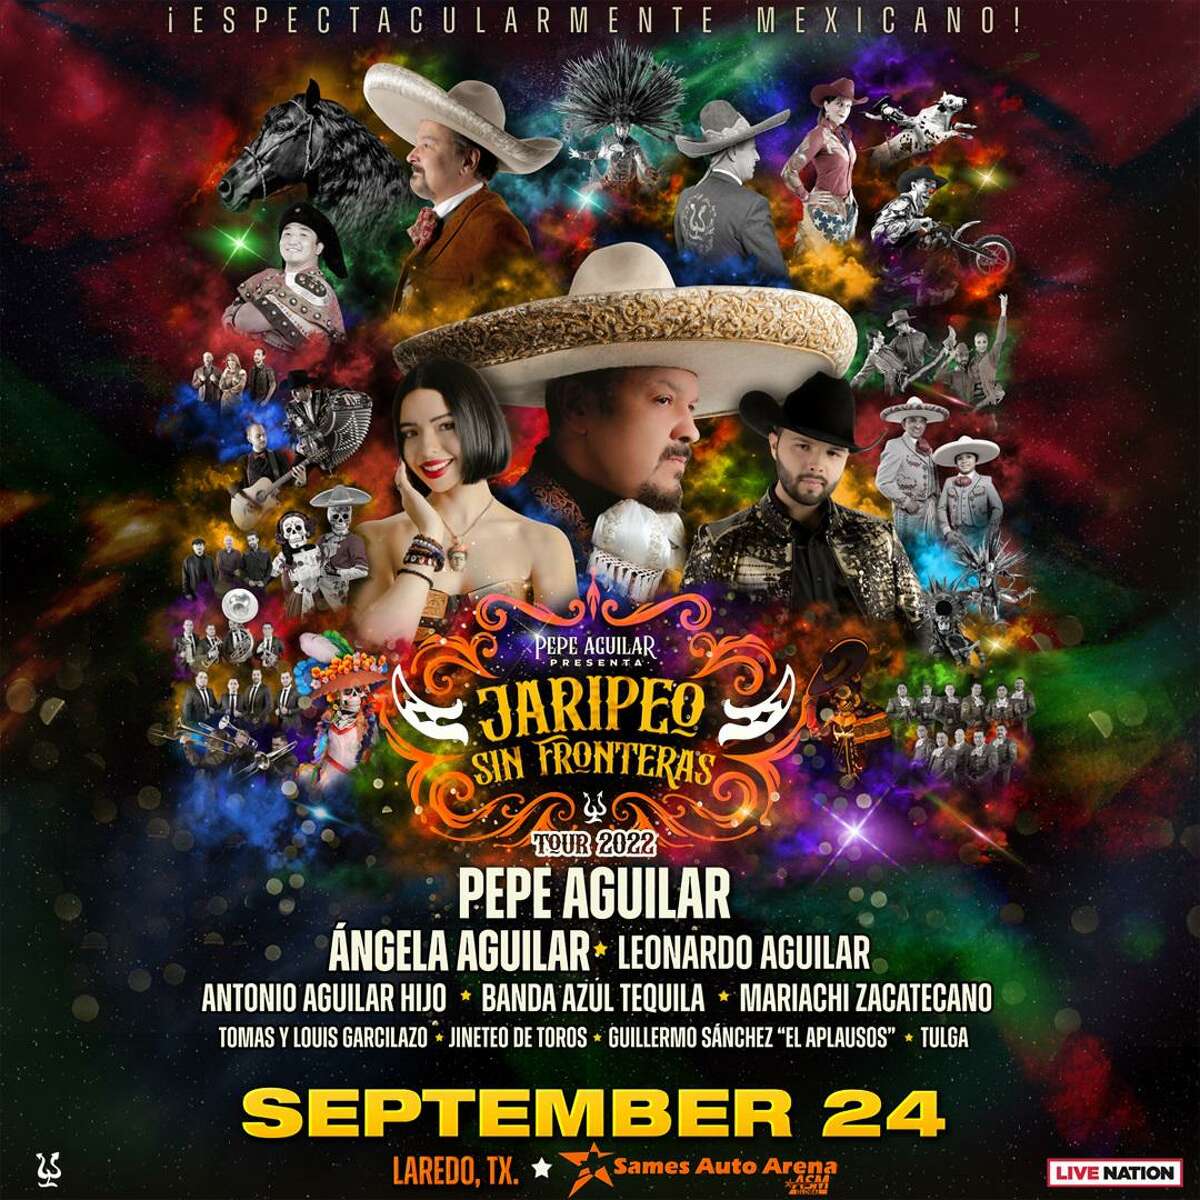 Pepe Aguilar Legendary Mexican singer Pepe Aguilar will make his visit to Laredo a family event as he is bringing his brother Antonio Aguilar, Hijo;  his talented Grammy daughter and twice Latin Grammy nominee Ángela Aguilar;  and his son Leonardo Aguilar, two-time Latin Grammy nominee, as part of his "Jaripeo Sin Fronteras" Trip.  Doors at 7pm Music at 8pm Saturday.  Same Auto Arena, 6700 Arena Blvd.  Tickets start at $40